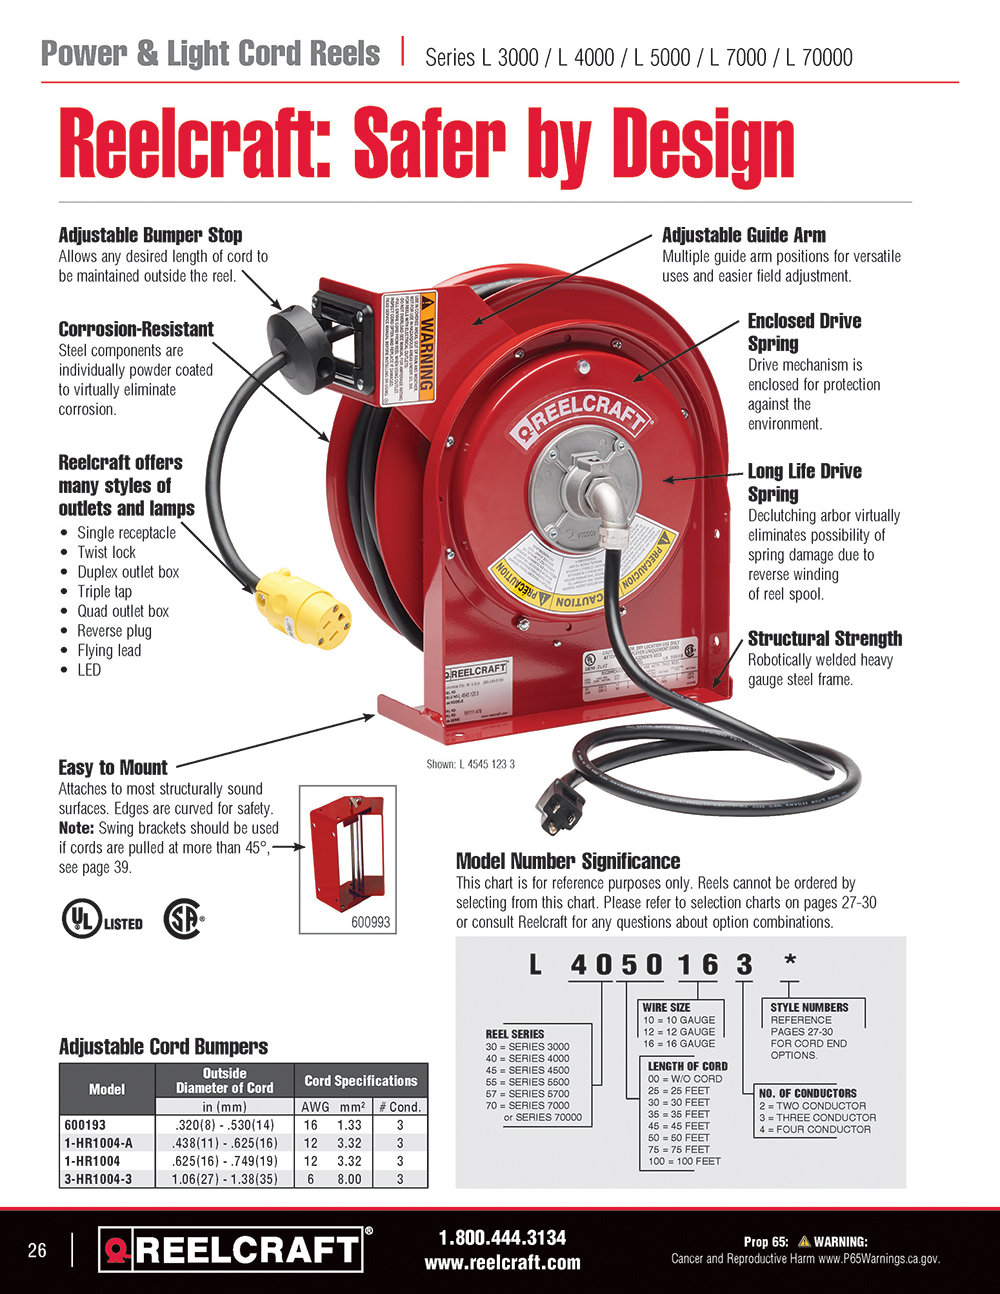 Reelcraft Catalog Page 26 - Power & Light Cord Reels